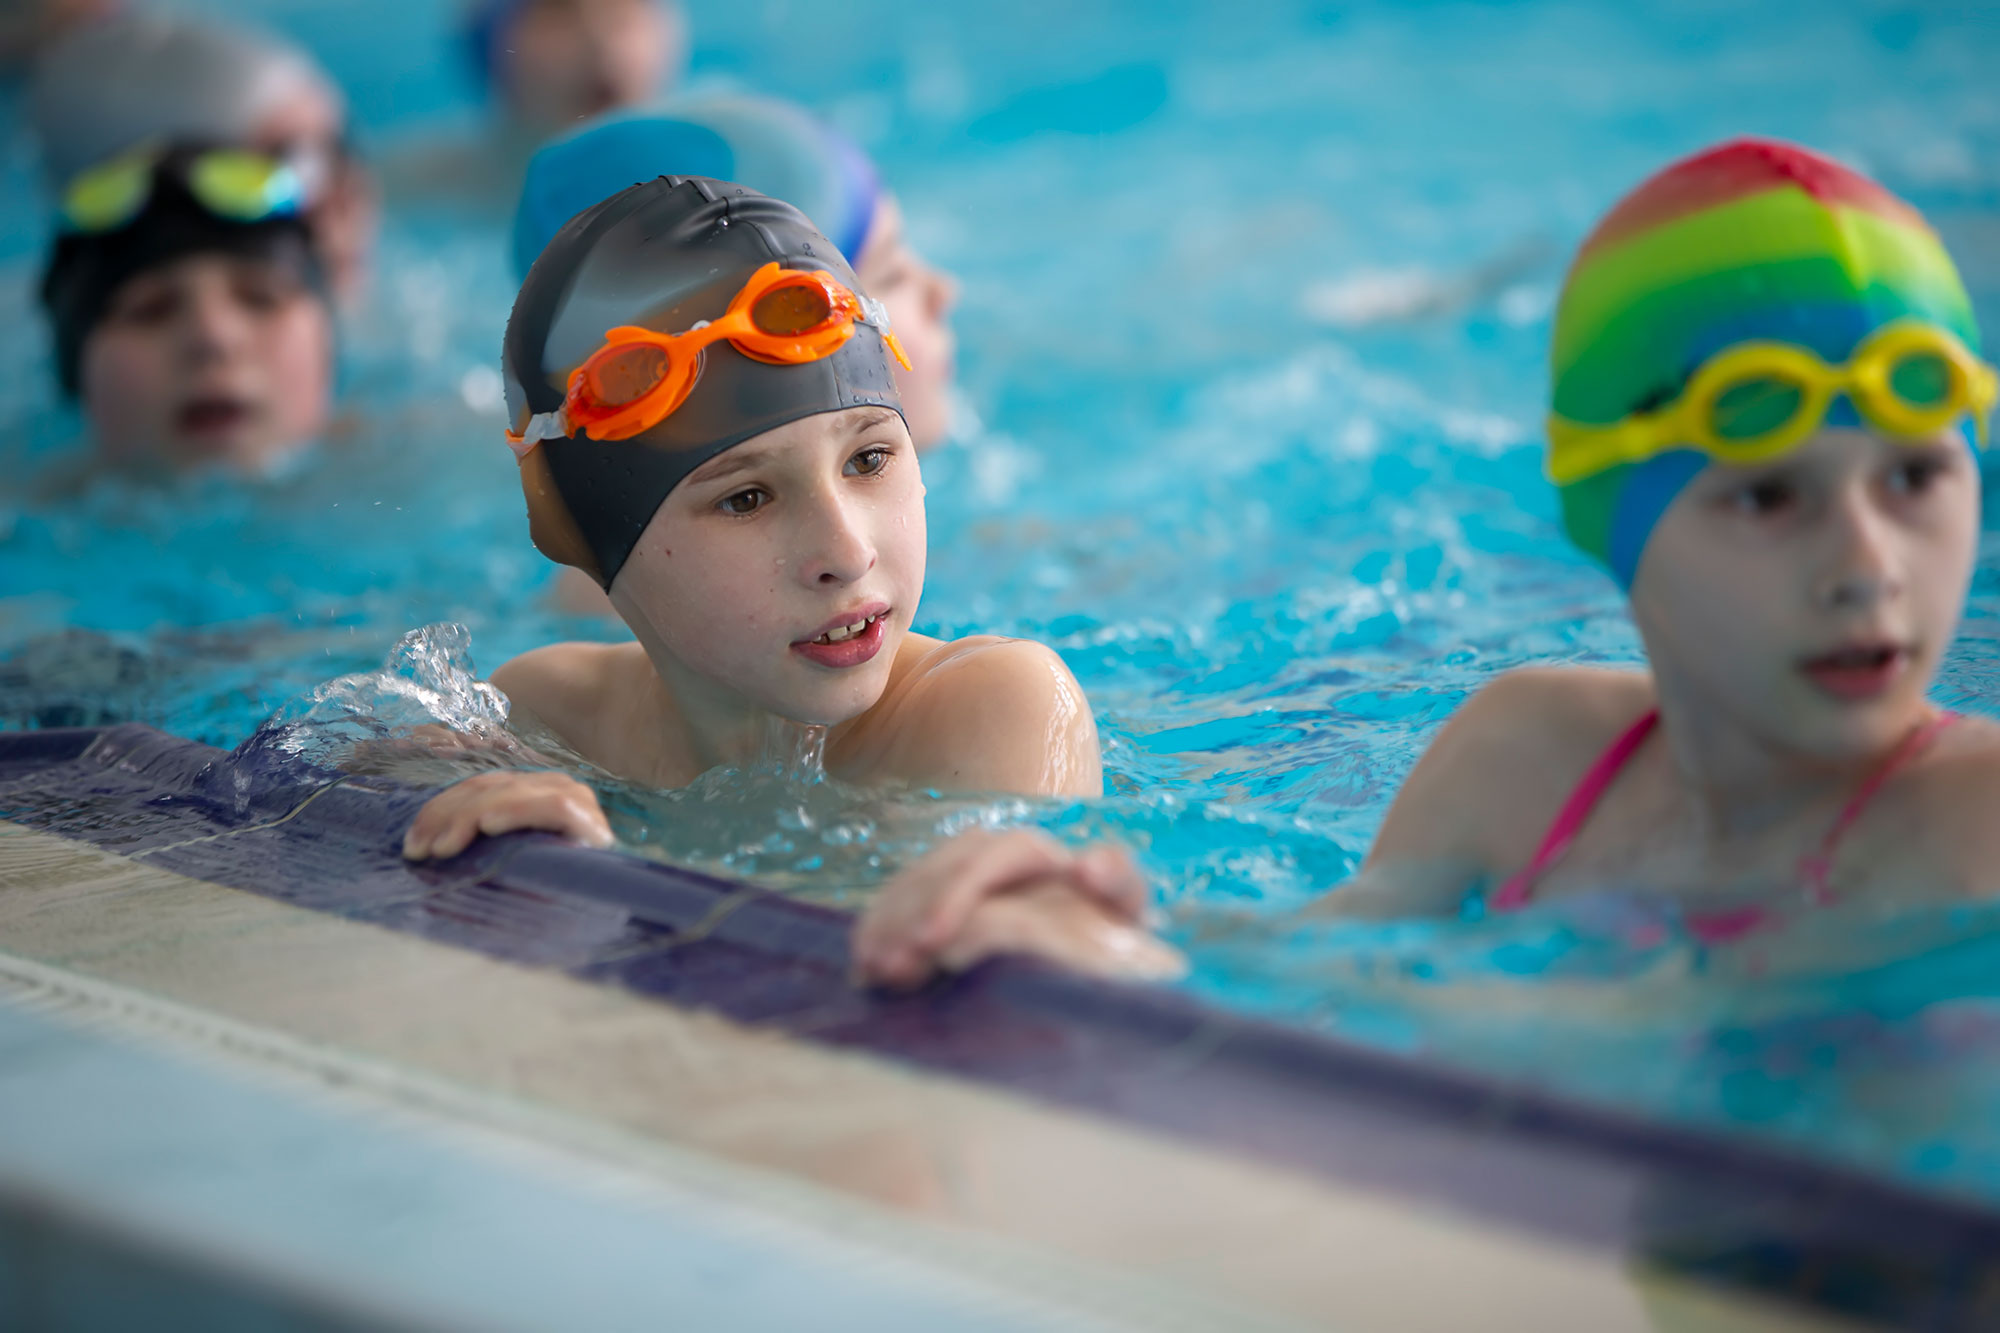 ukactive warns of ongoing threat to children and young people despite return to pre-pandemic activity levels